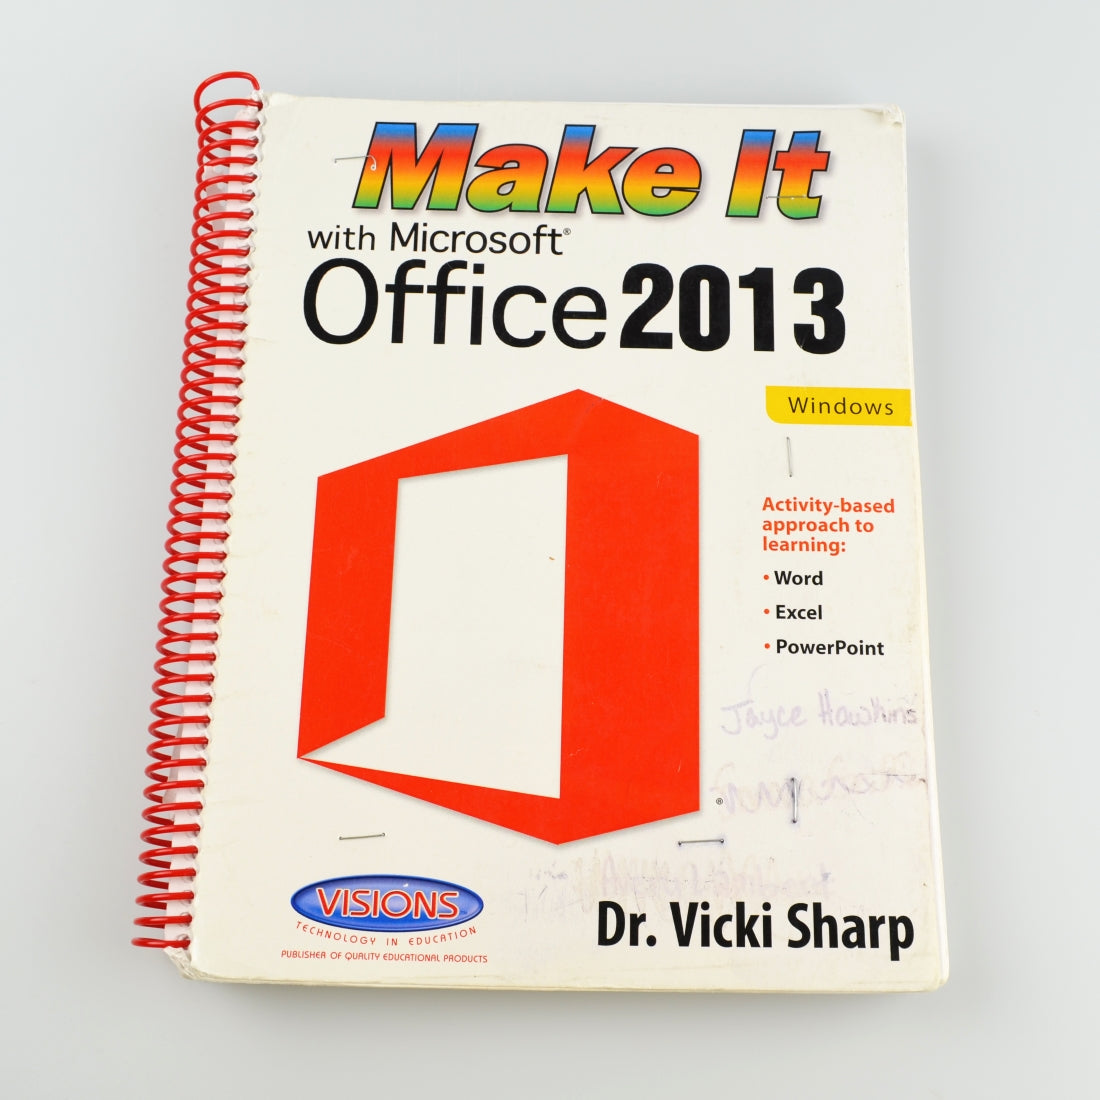 Make It with Microsoft Office 2013 by Vicki Sharp - Missing Back Cover - Homeschool